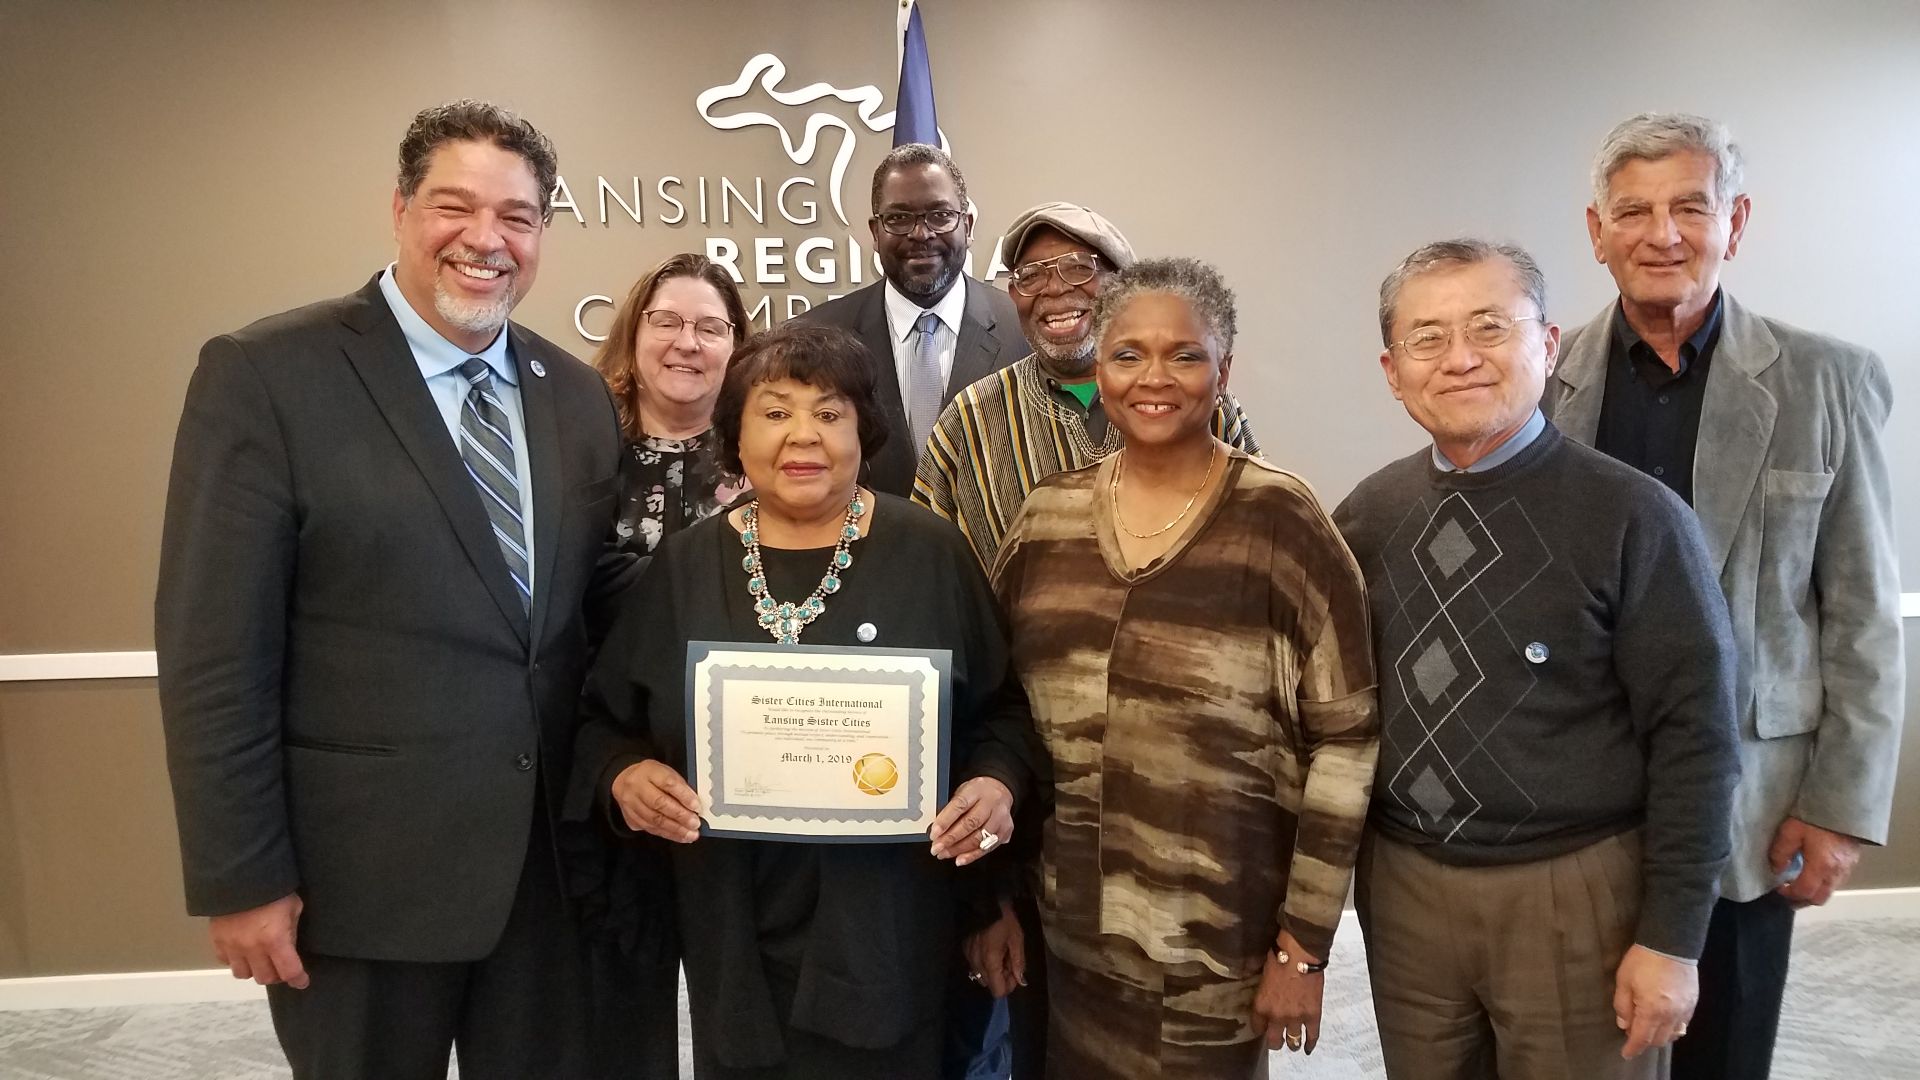 Sung Lee stands with Lansing Chamber of Commerce colleagues holding a plaque